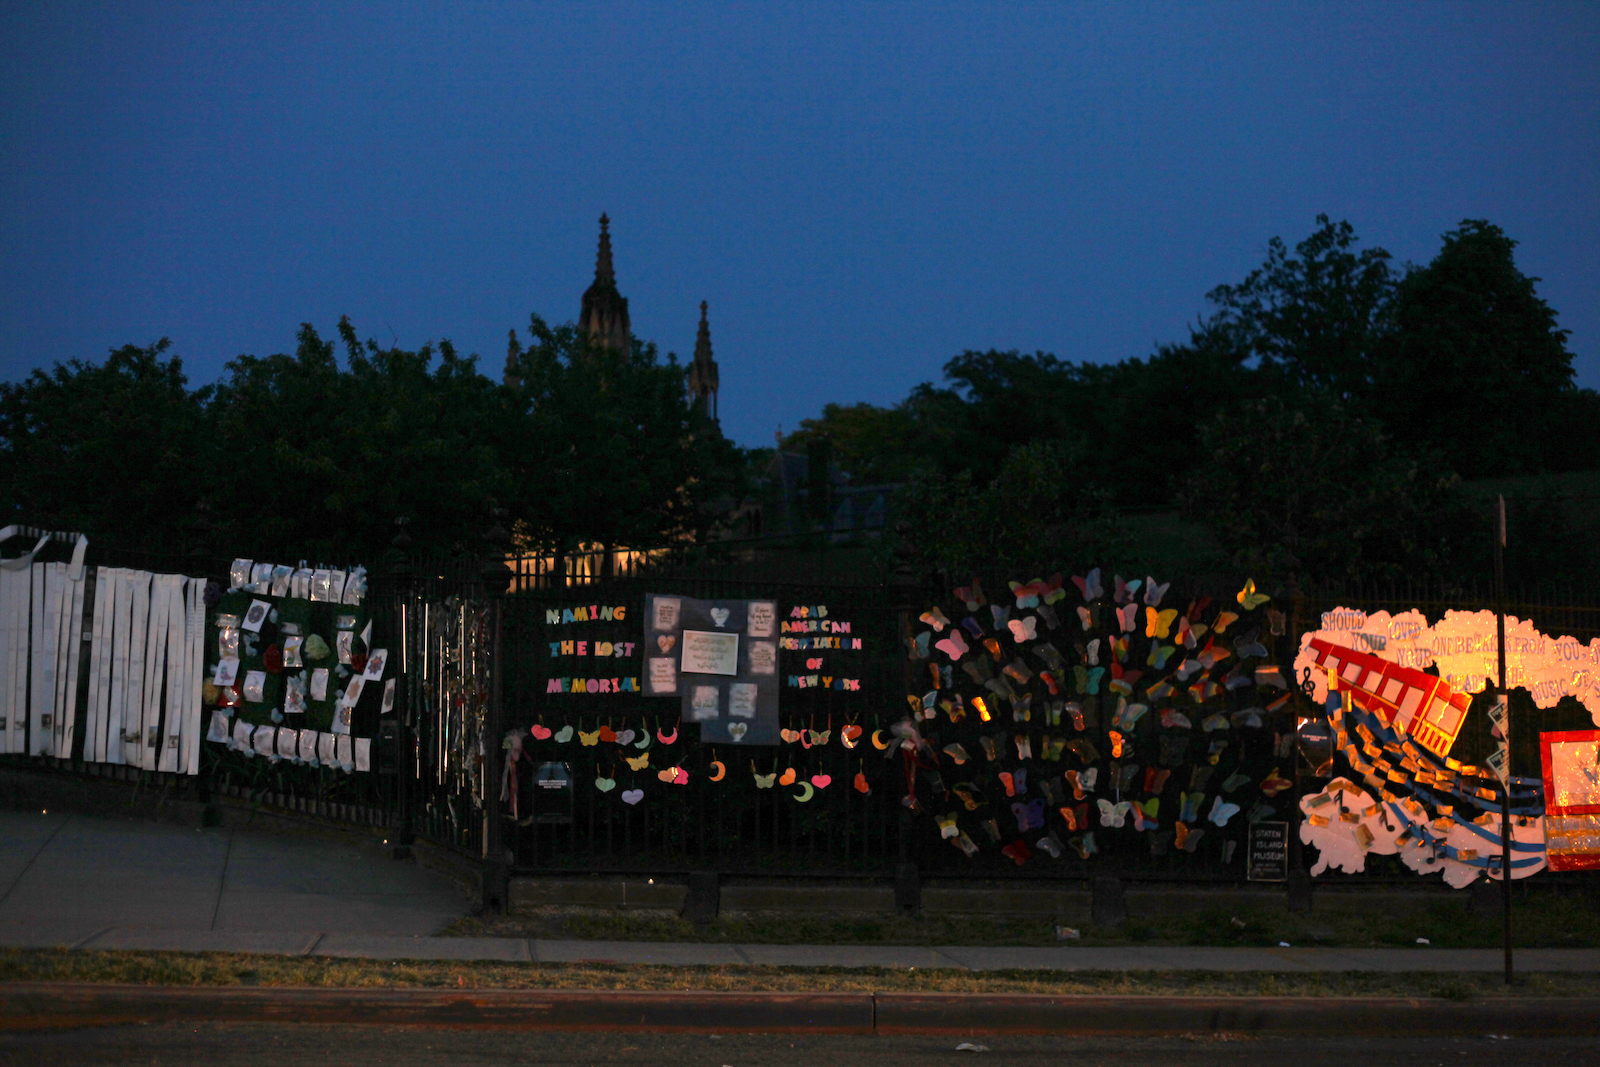 The fence around Green-Wood Cemetery at dusk, with trees and the steeple of the gothic chapel in the background